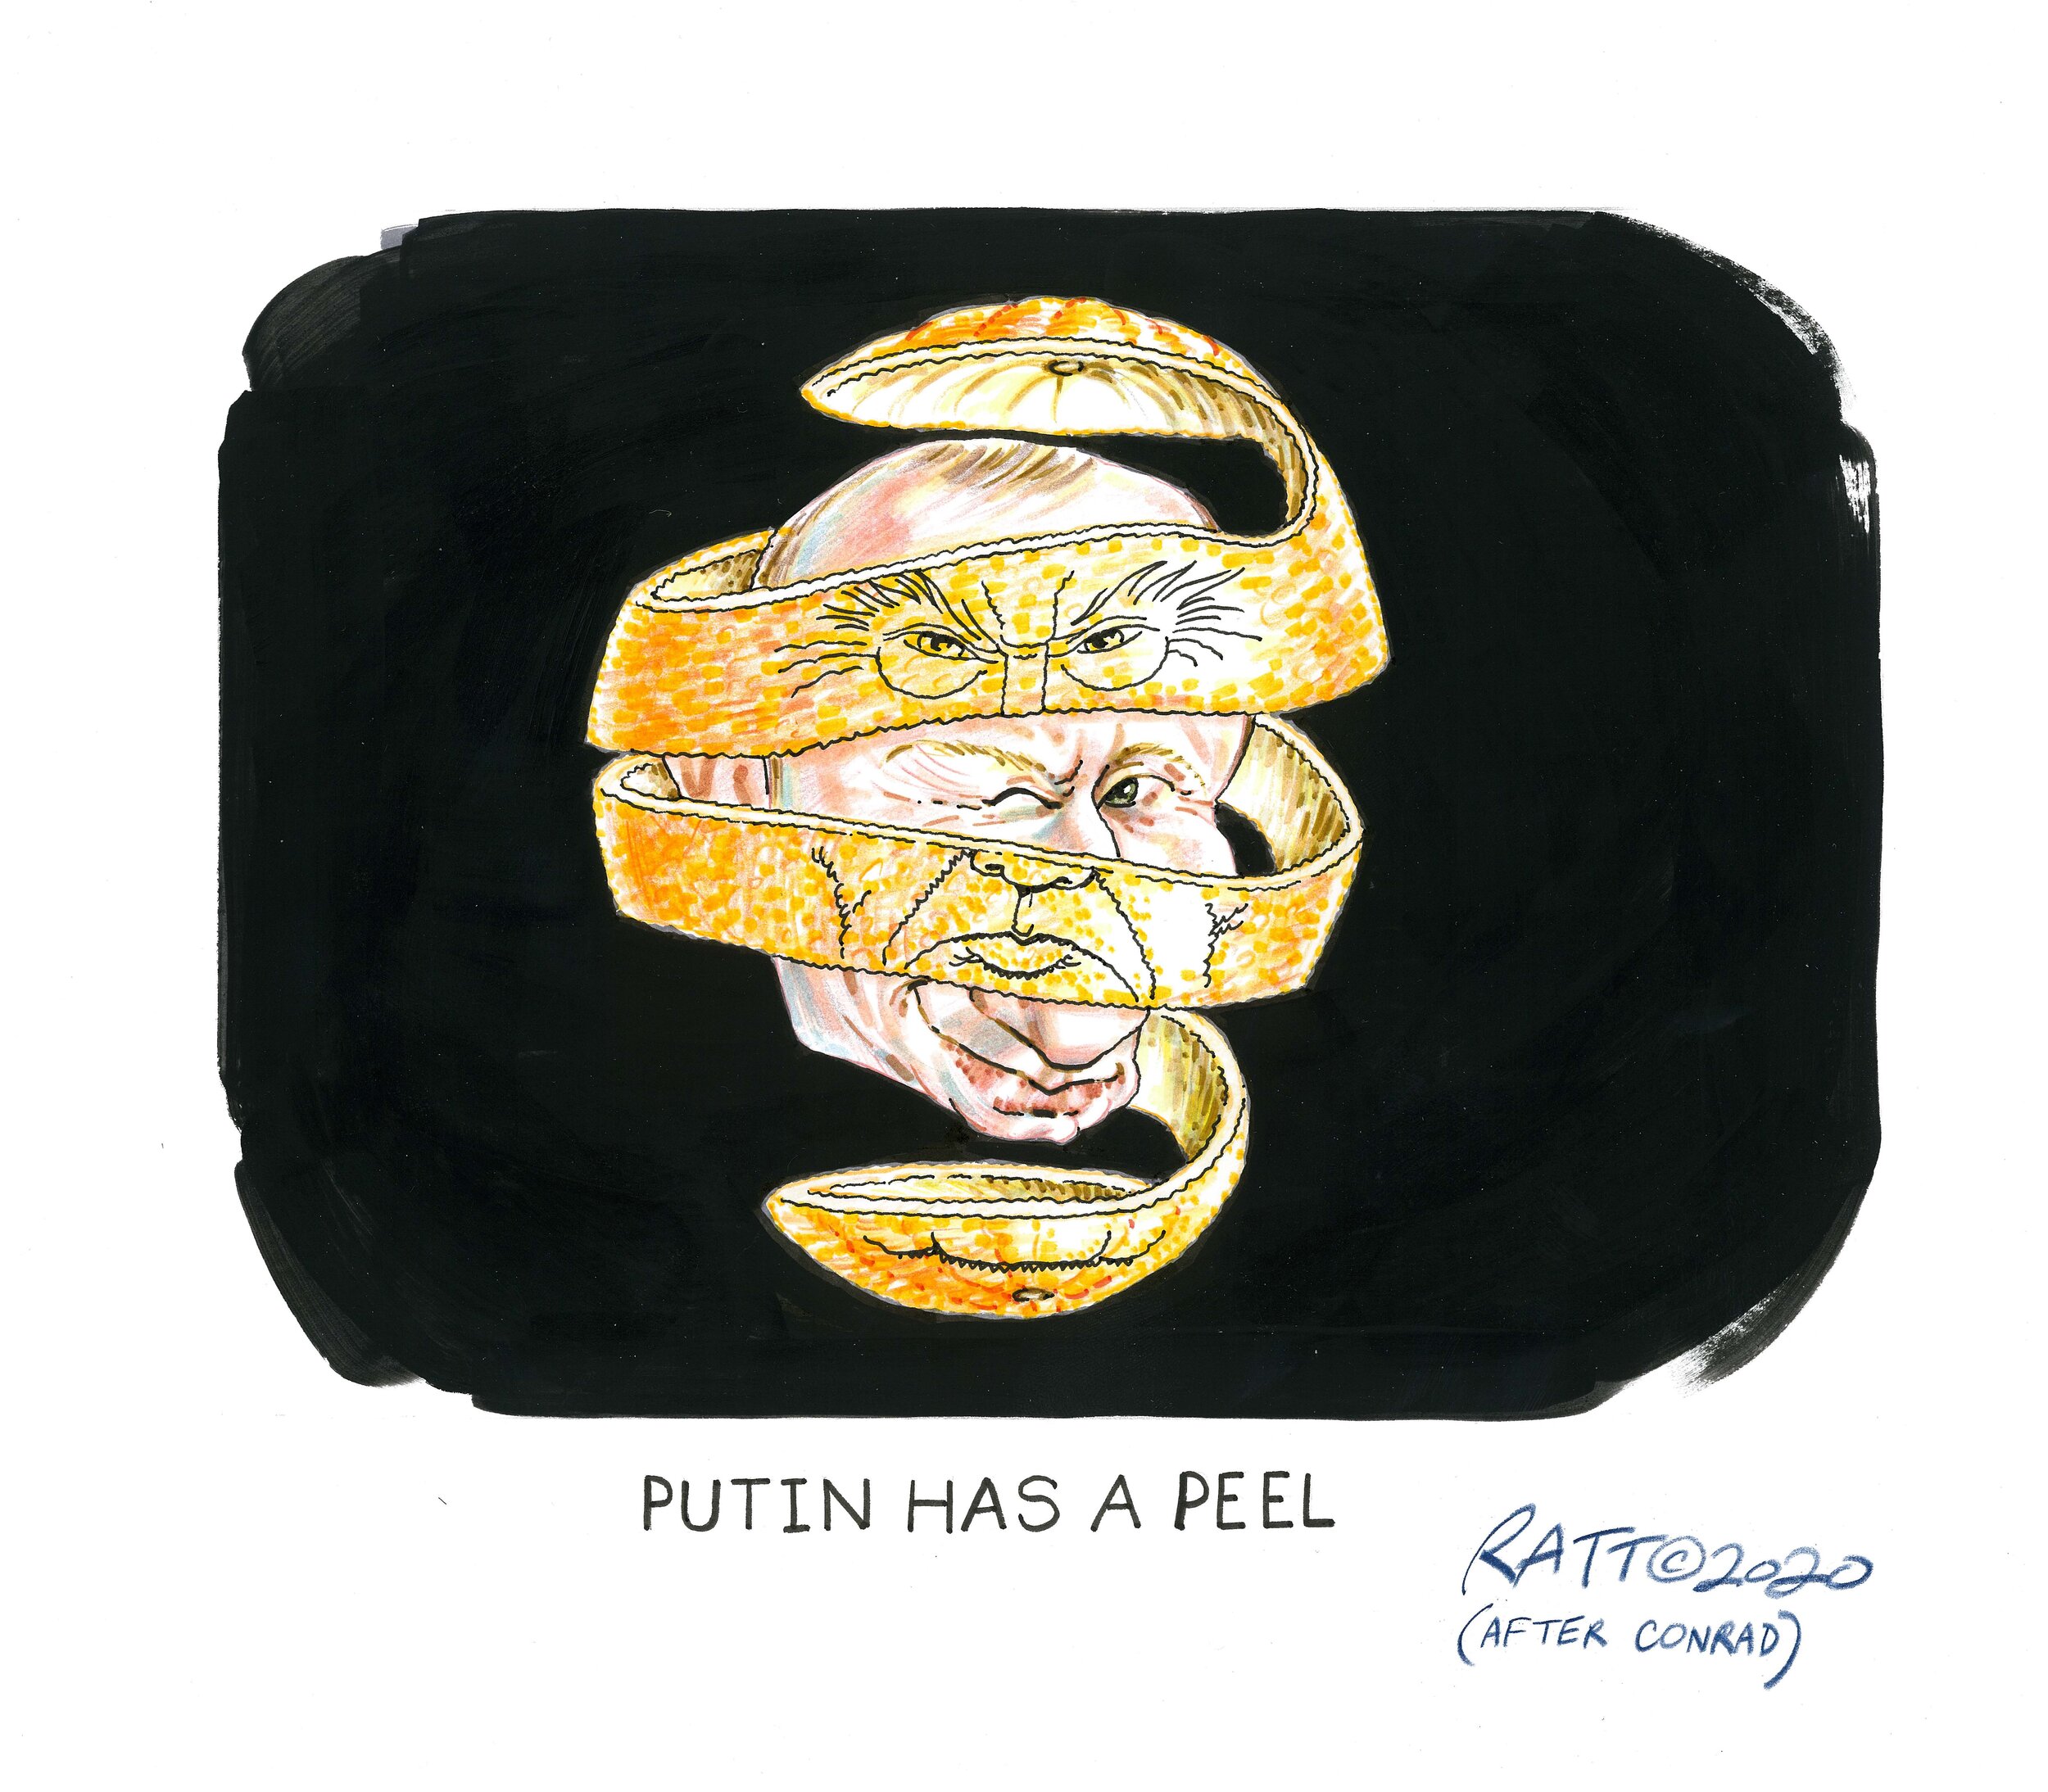   Putin has a peel.  (The Rule of Law This Week, March 1, 2020.)  